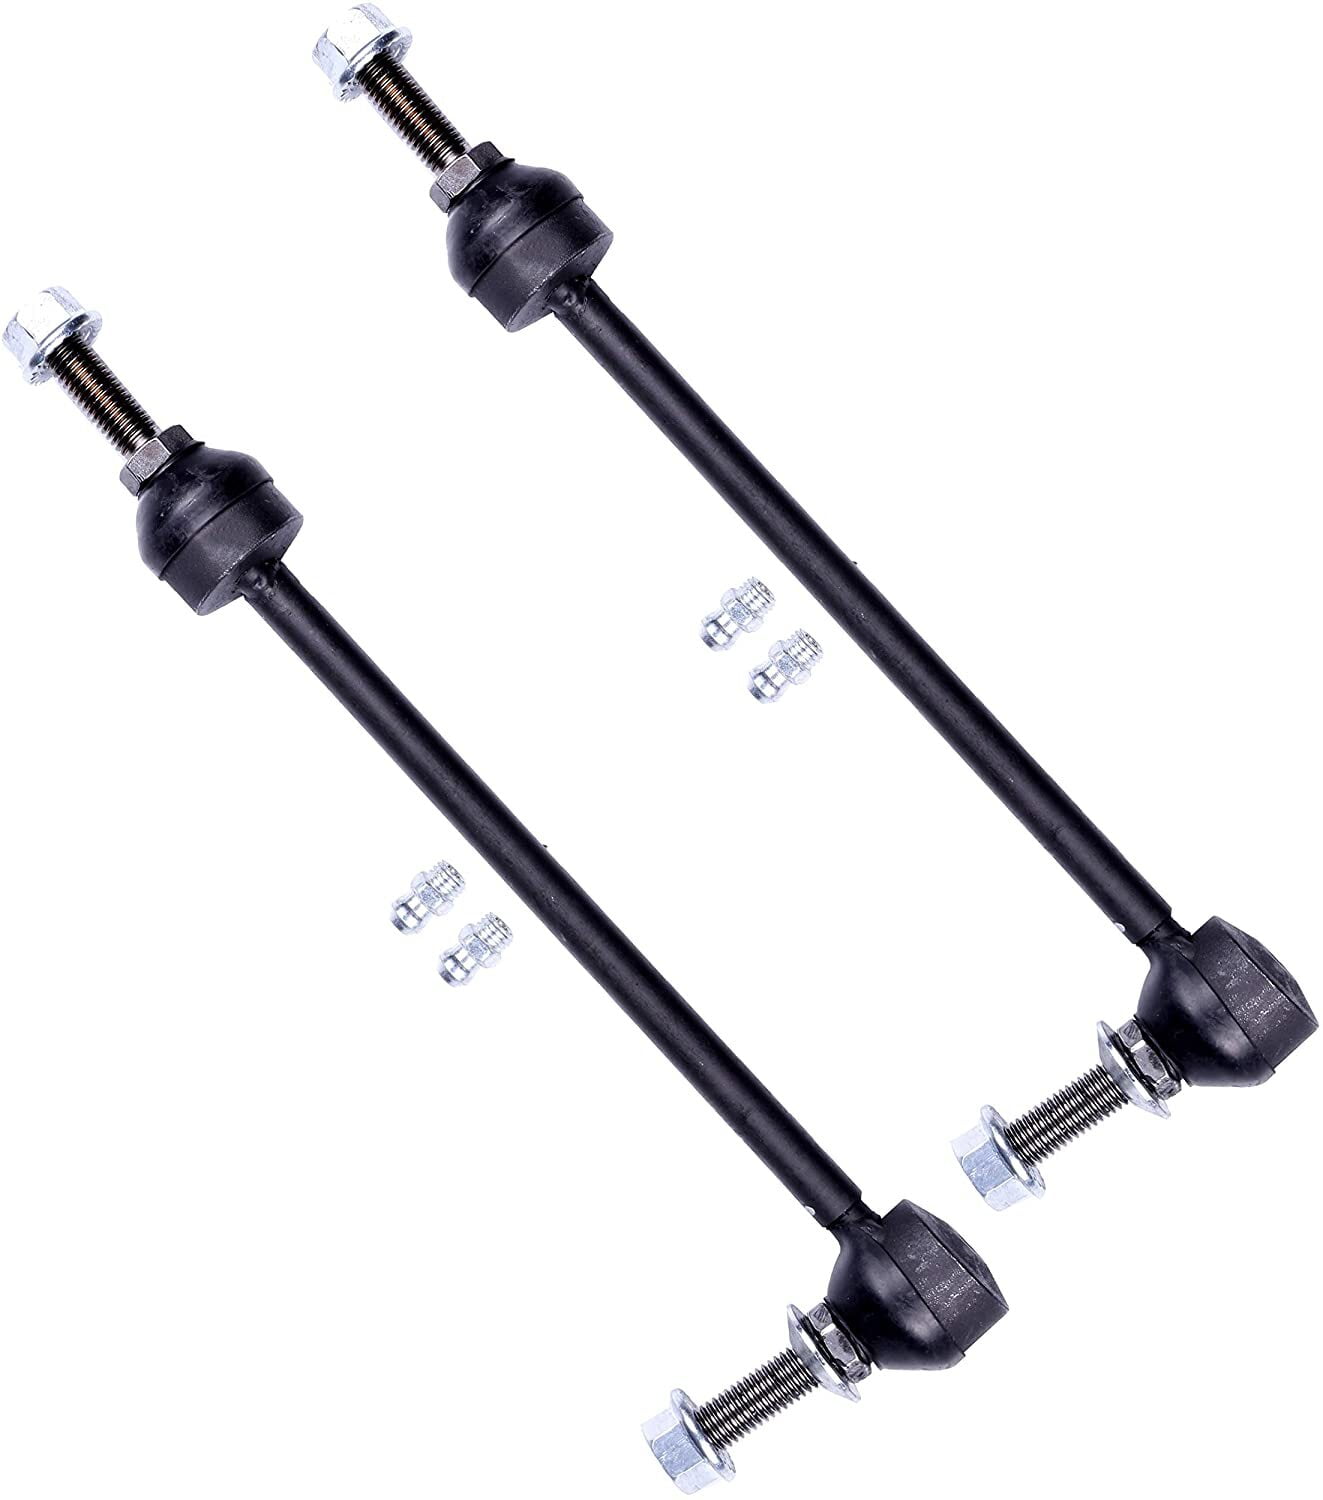 SCITOO Front Rear Steering Sway Bar Link Stabilizer Bar fit Toyota Celica 2000 2001 2002 2003 2004 2005 pack of 4 